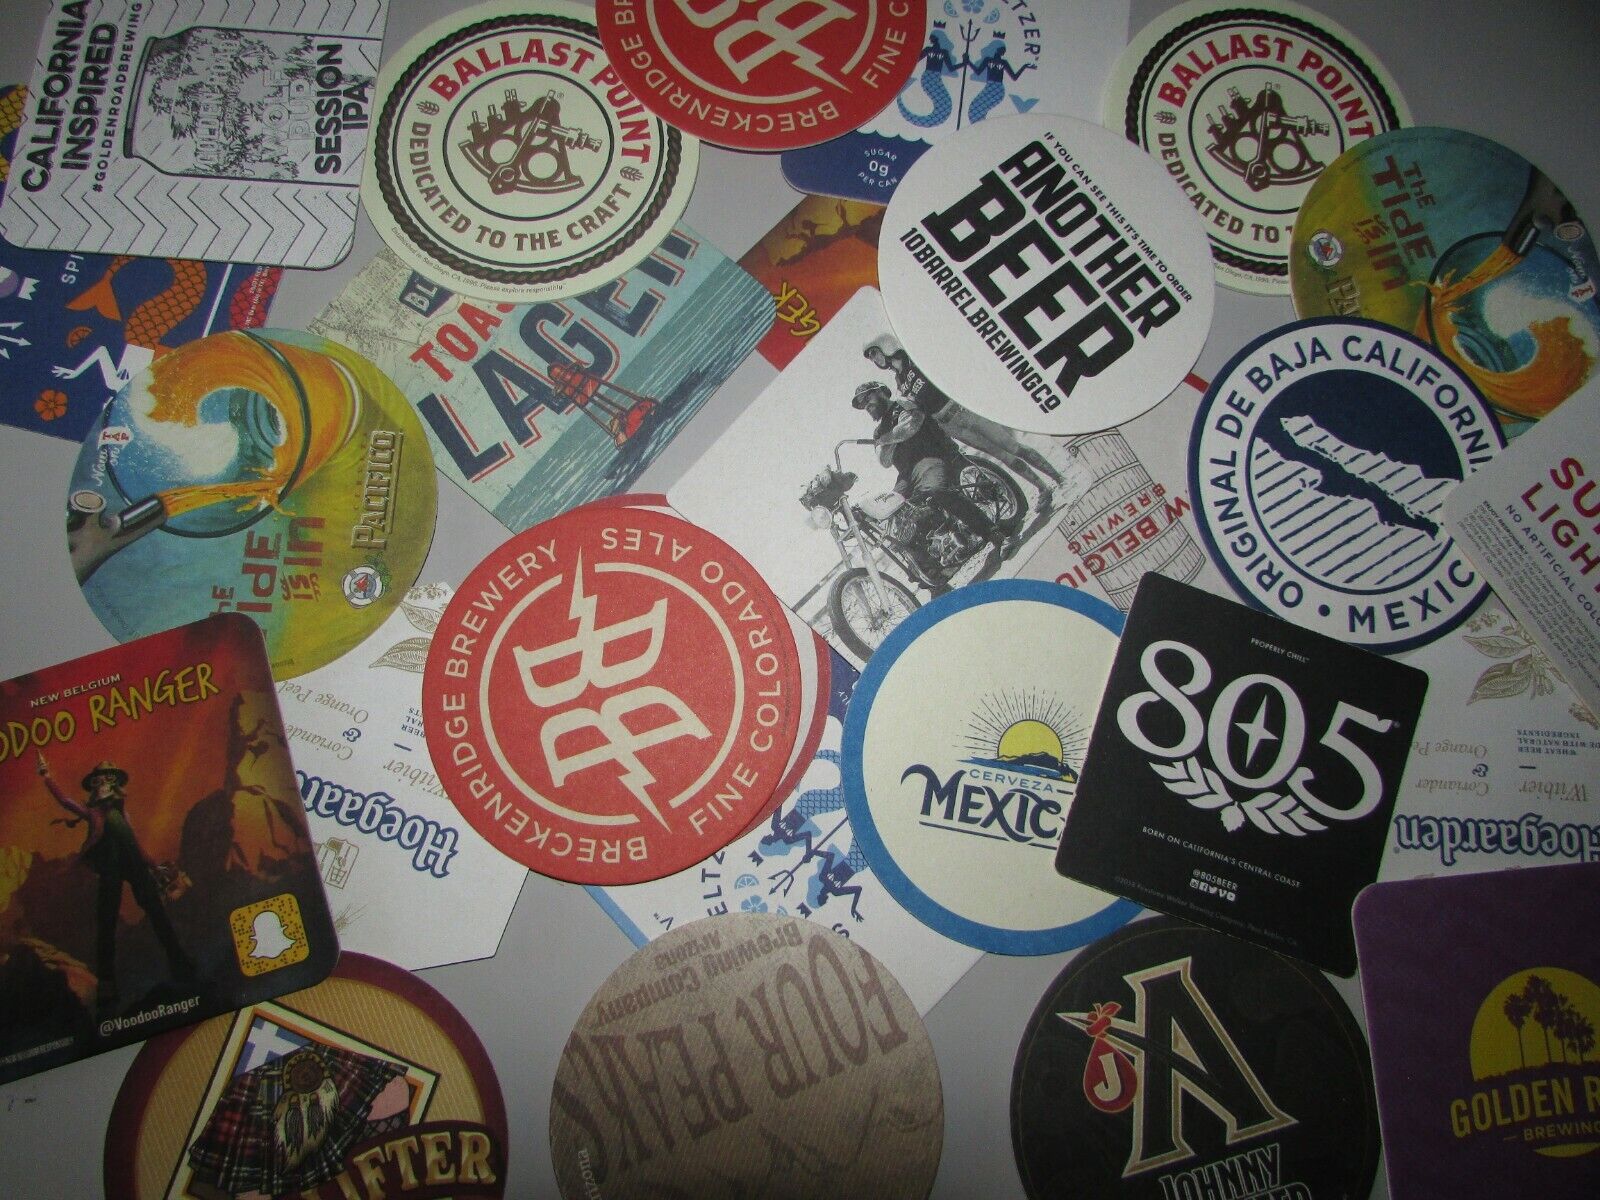 25 Beer Bar Coasters 805 Voodoo Ballast Point Elysian Pacifico Blue Point lot a